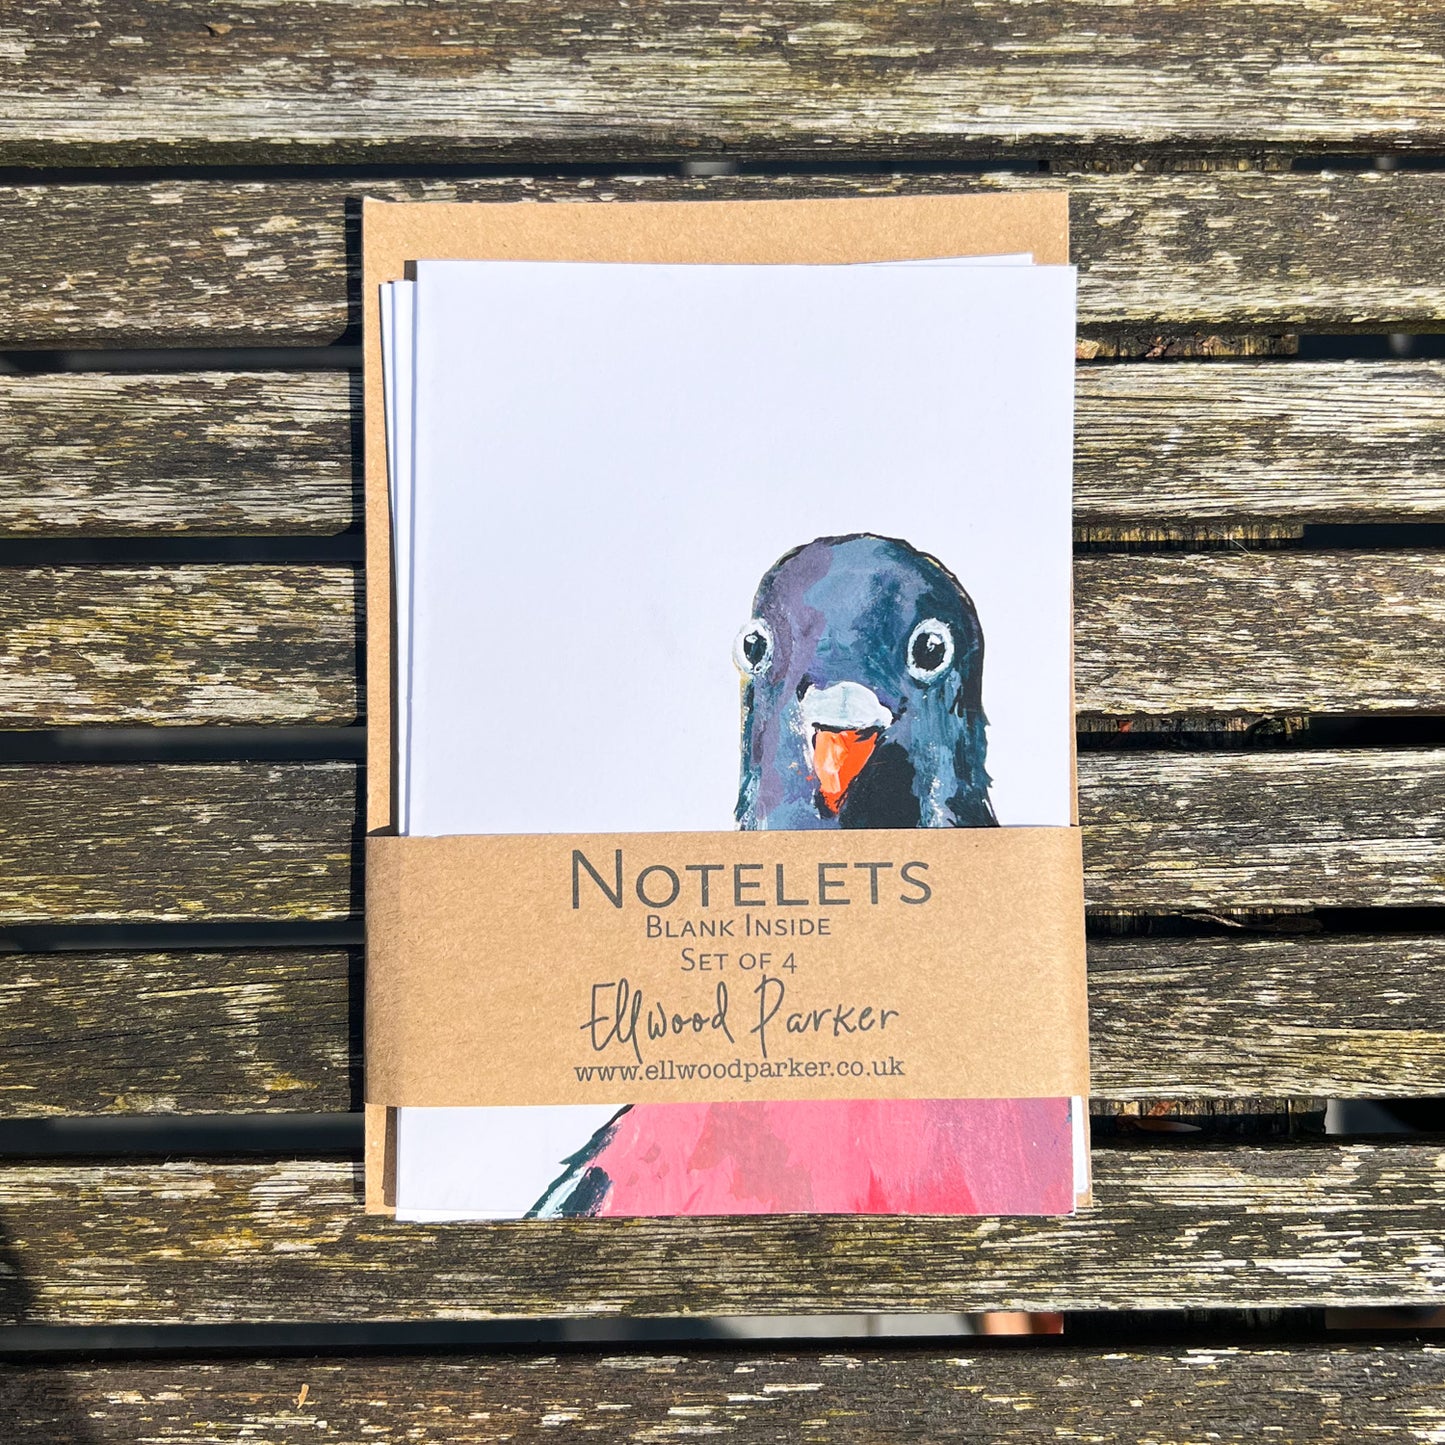 Set of 4 notelets with an illustration of a pigeon and a brown card belly band wrapper photographed from above on a wooden table.